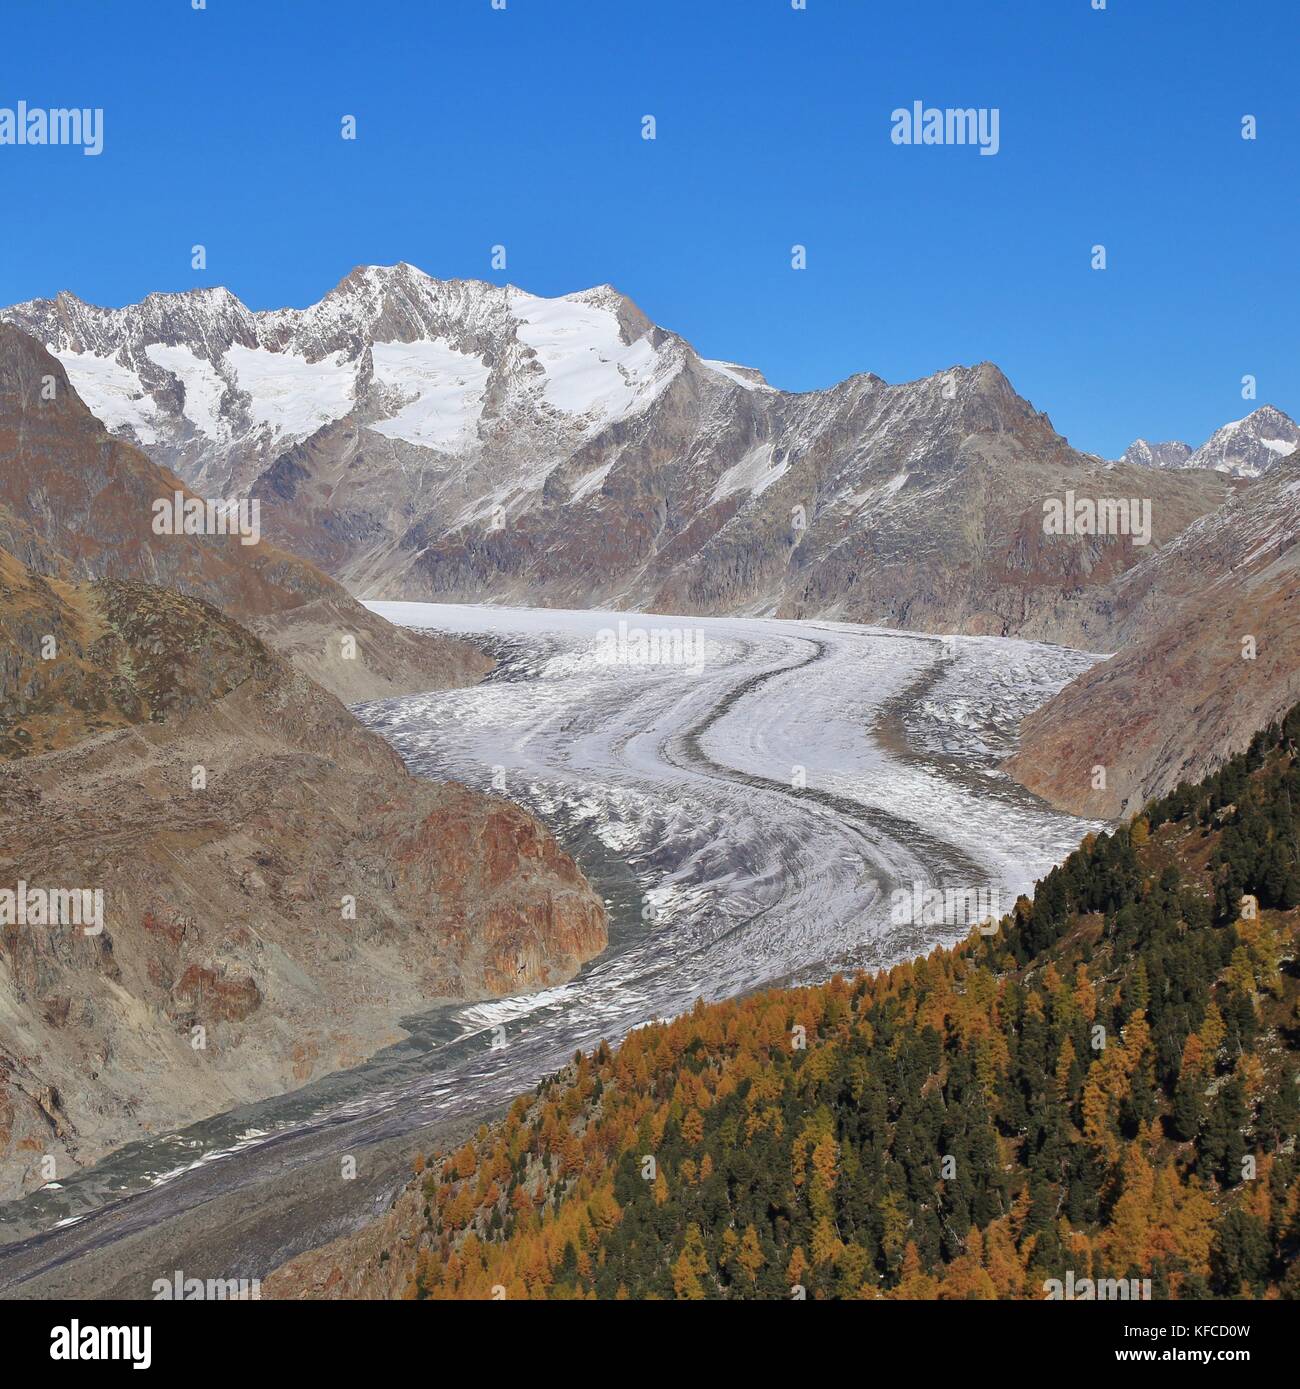 Golden larch forest and Aletsch glacier, longest glacier of the Alps. Stock Photo